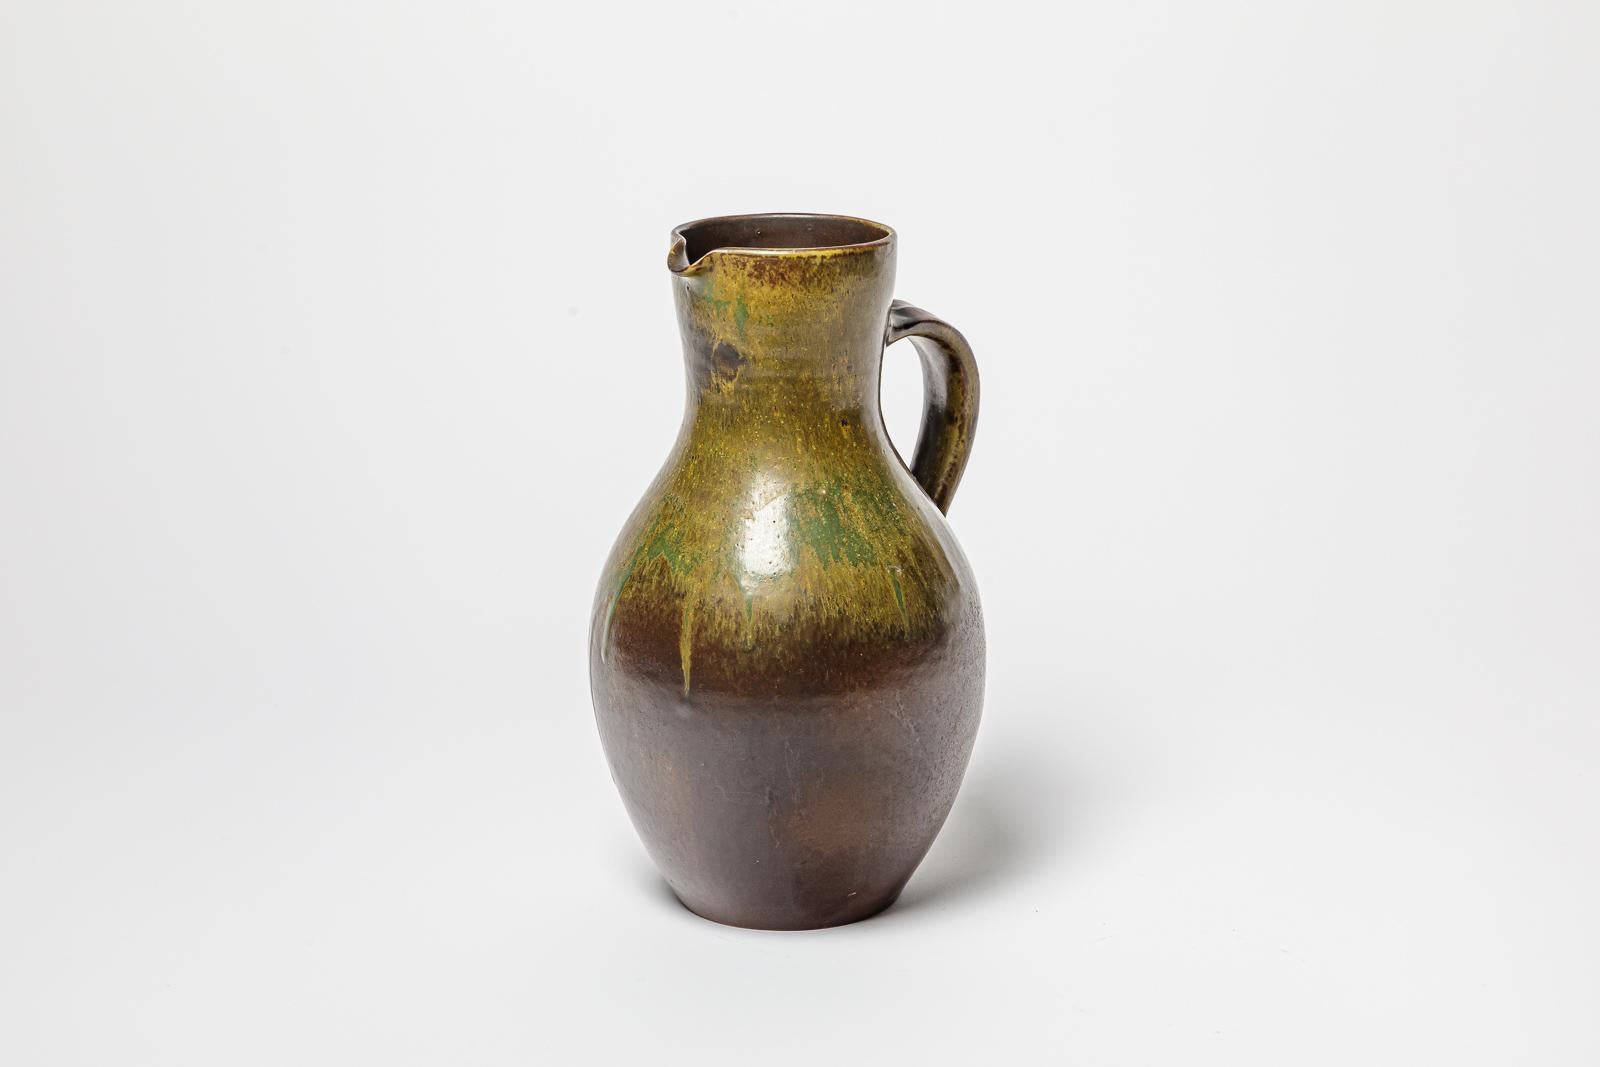 French Brown and green glazed ceramic pitcher by Roger Jacques, circa 1960-1970. For Sale